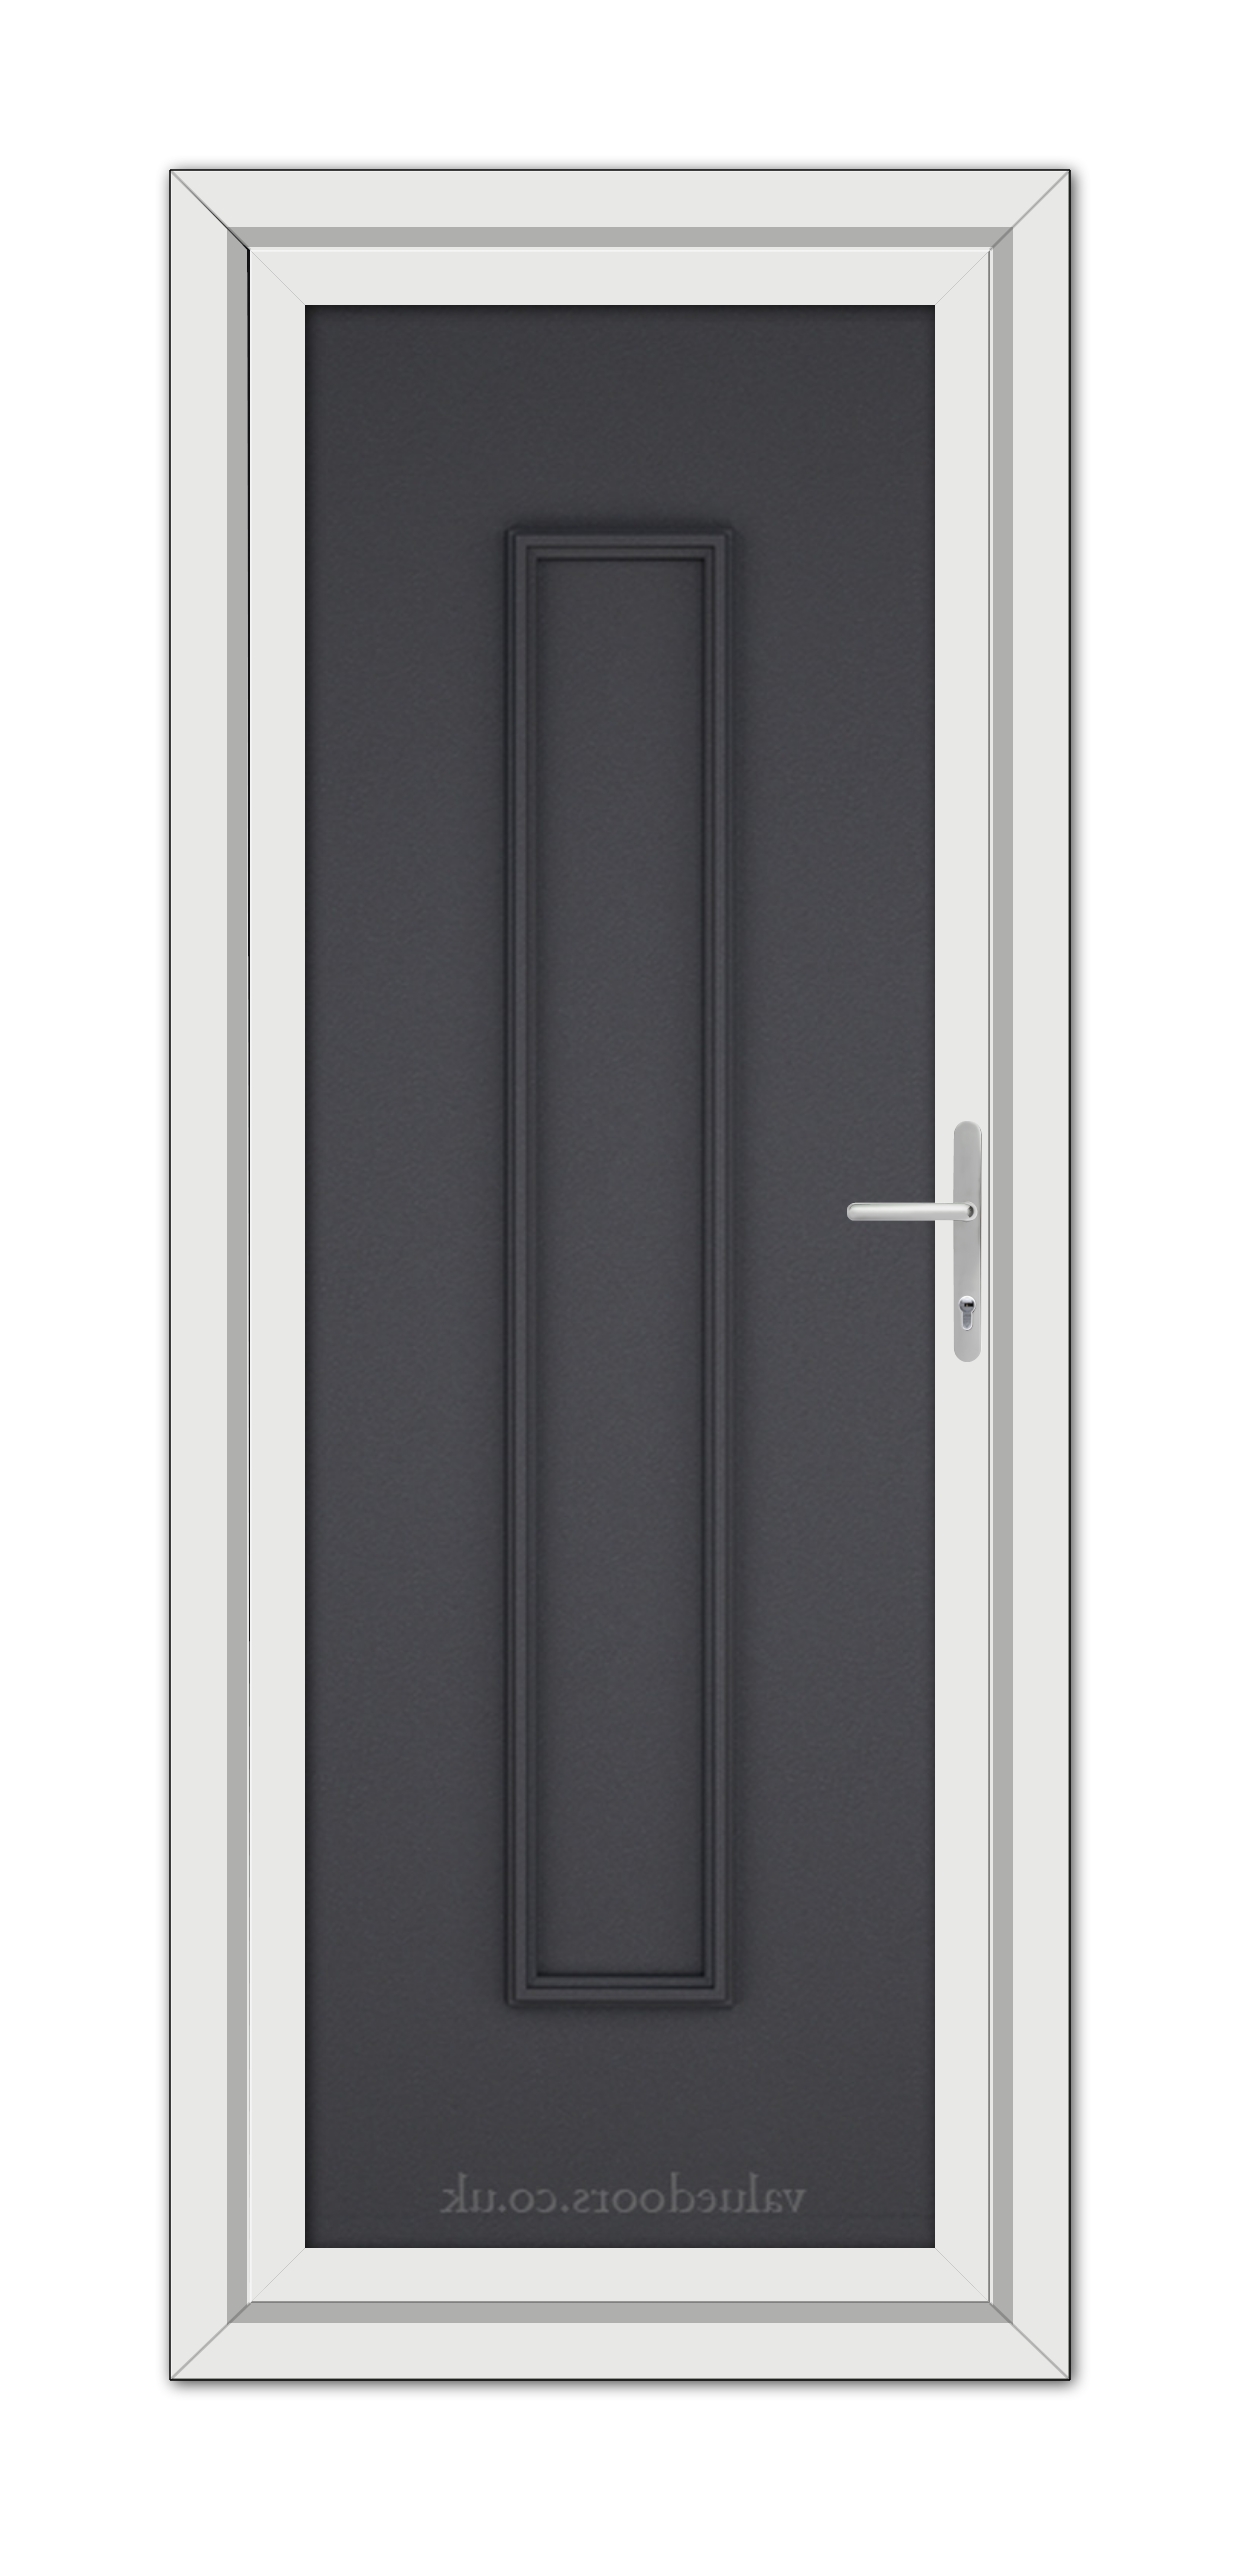 A modern Grey Grained Rome Solid uPVC door, finished in dark gray with a long vertical handle, set within a white frame.